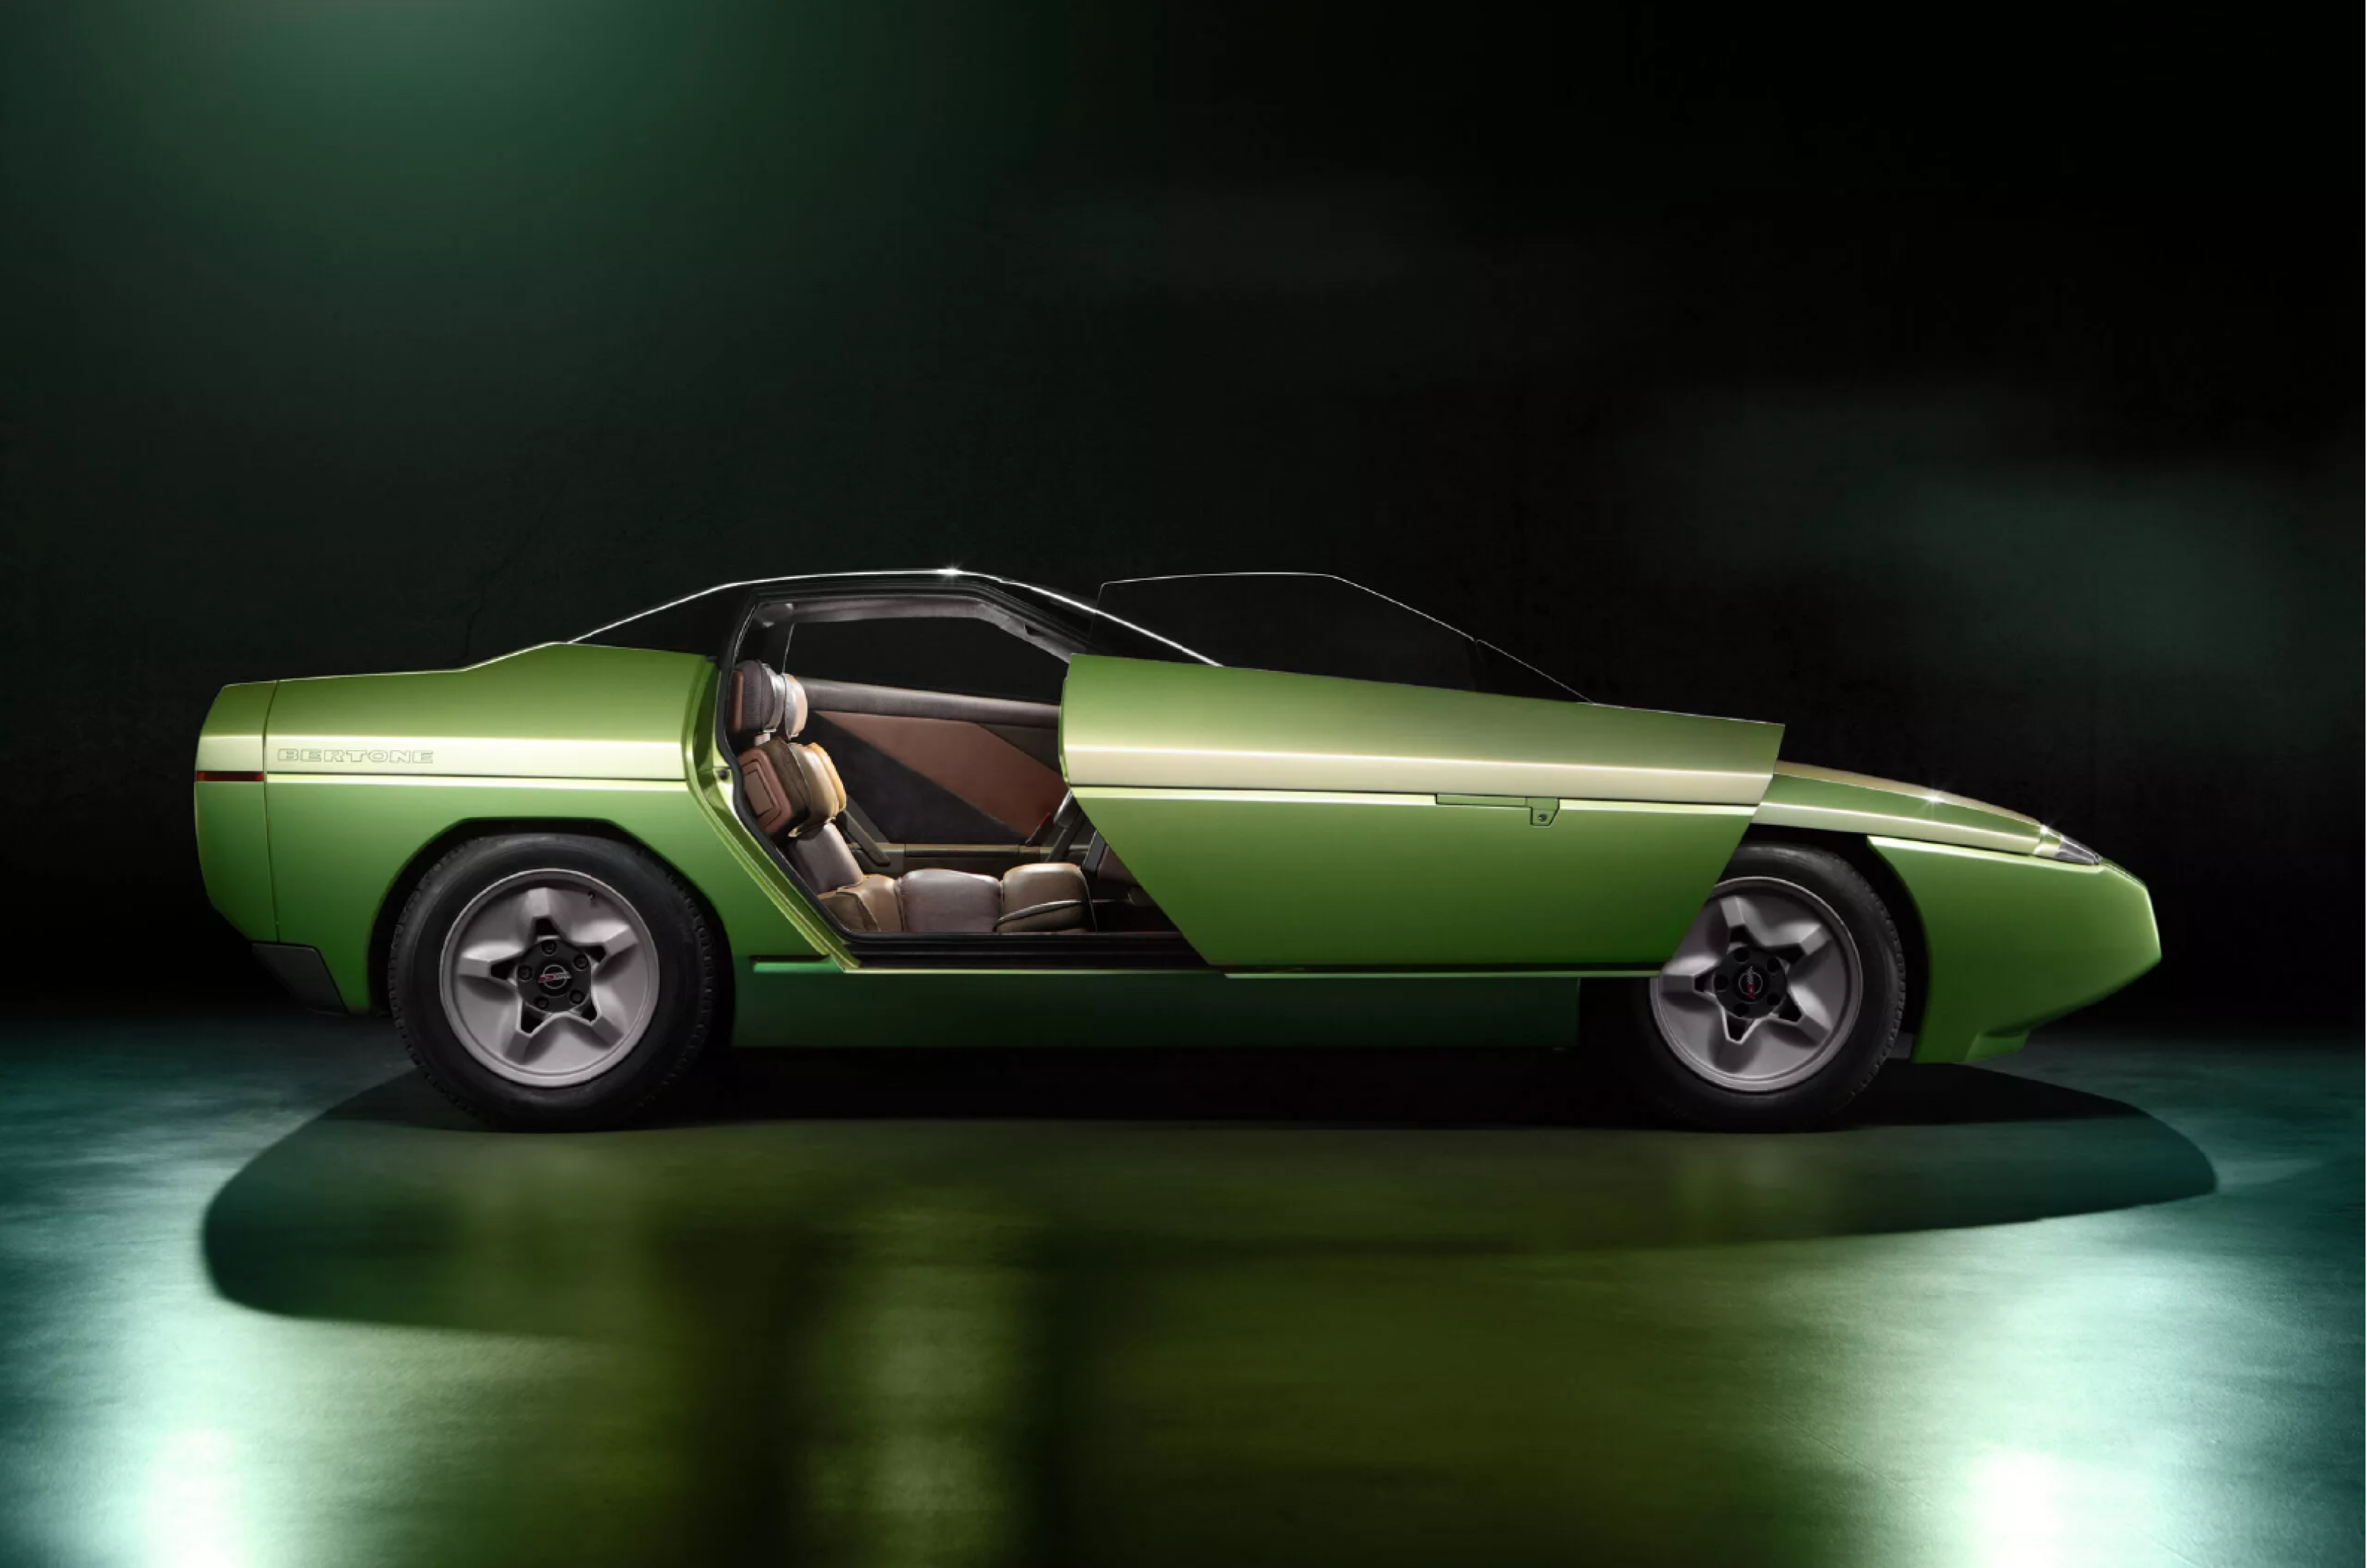 <p>Crafted on the chassis of the Chevrolet Corvette, the Bertone Ramarro concept had to distinguish itself from that popular sports car.</p>  <p>Bucking the trend, Bertone opted for doors that swung out and forwards. The overall design was a vehicle that was shorter and wider than the stock Corvette of the time, and the radiator and air conditioning were moved to the rear where the spare tire was usually stored.</p>  <p>After its reveal in Los Angeles before the 1984 Olympics, it went on tour around several motor shows</p>  <p>In 1985 the Ramarro was crowned with the Car Design Award for concept cars. The judges reportedly said: “its bold ideas worked into a design project which gives the Chevrolet Corvette an entirely new personality.”</p>